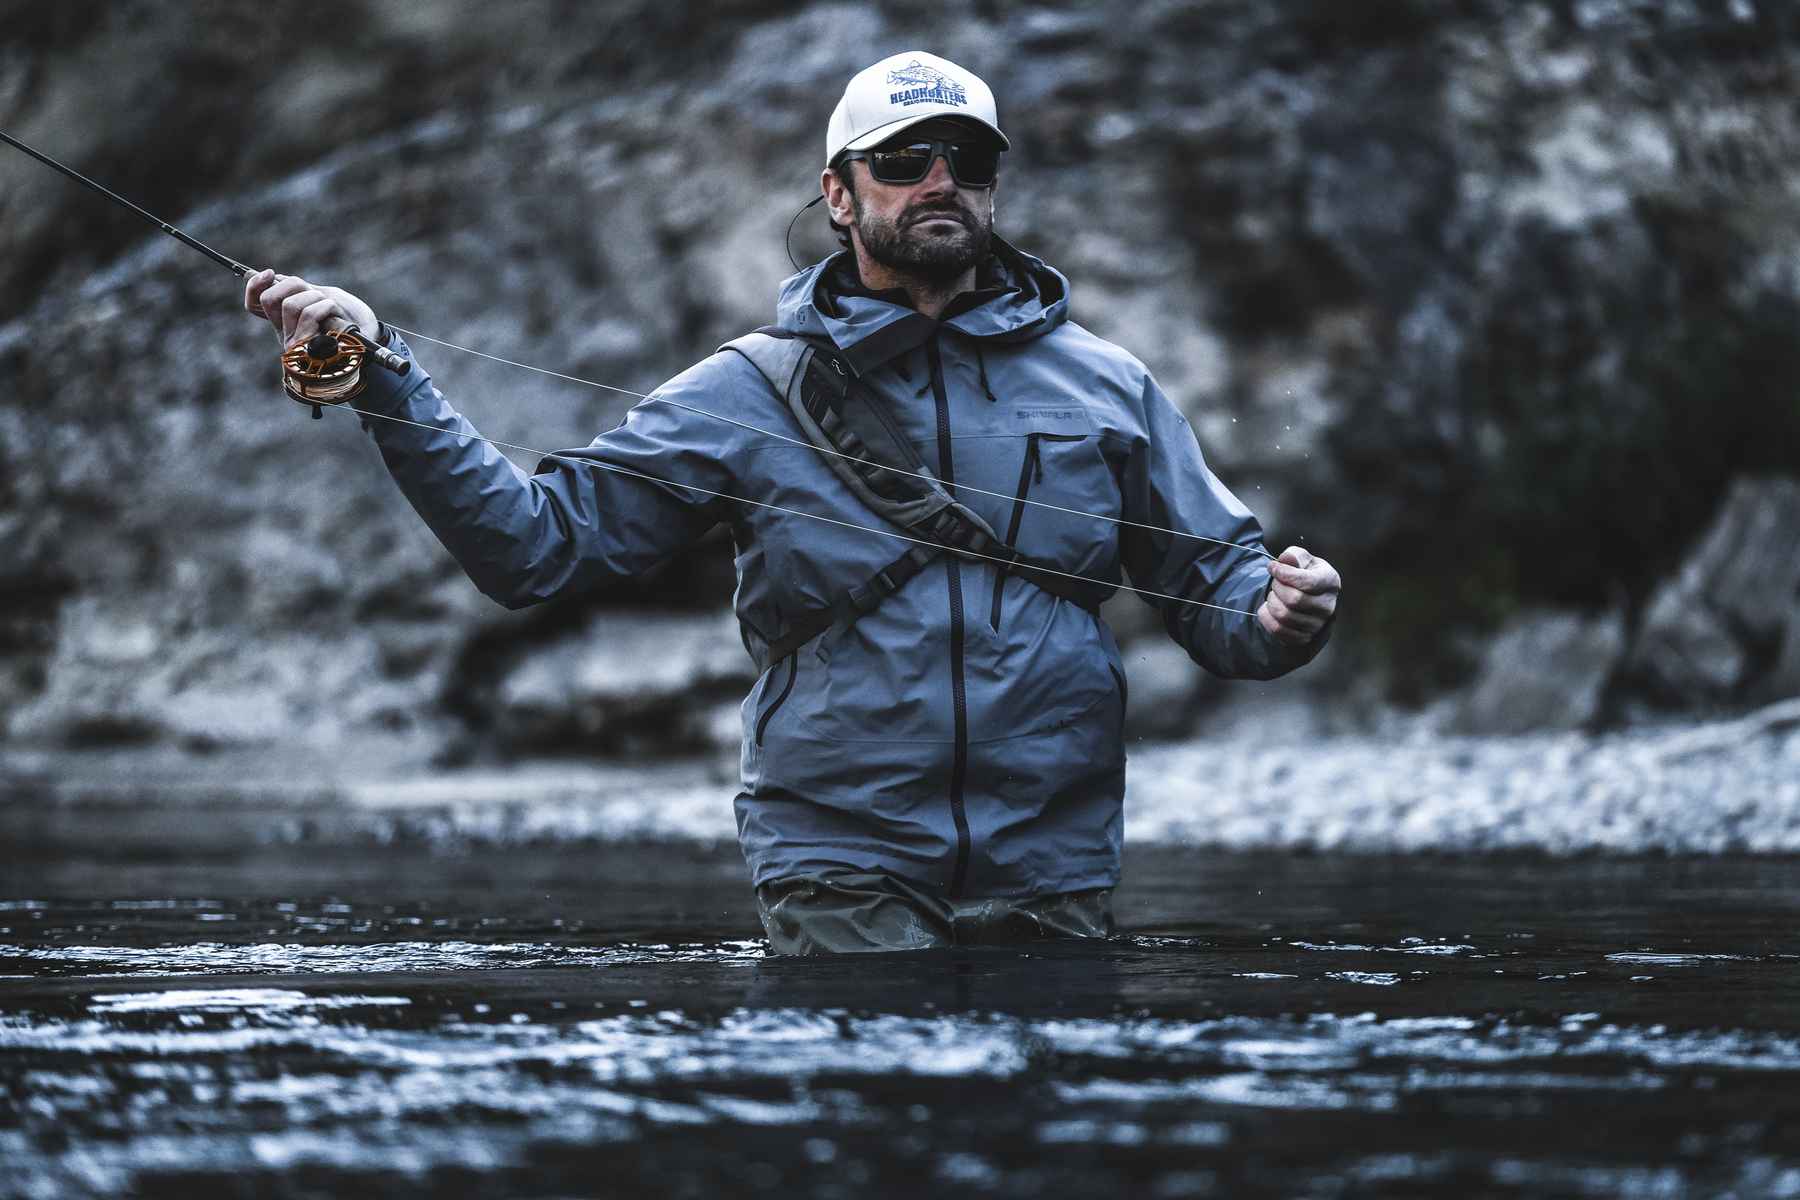 New Montana-based fly fishing apparel brand Skwala launches | Hatch Magazine